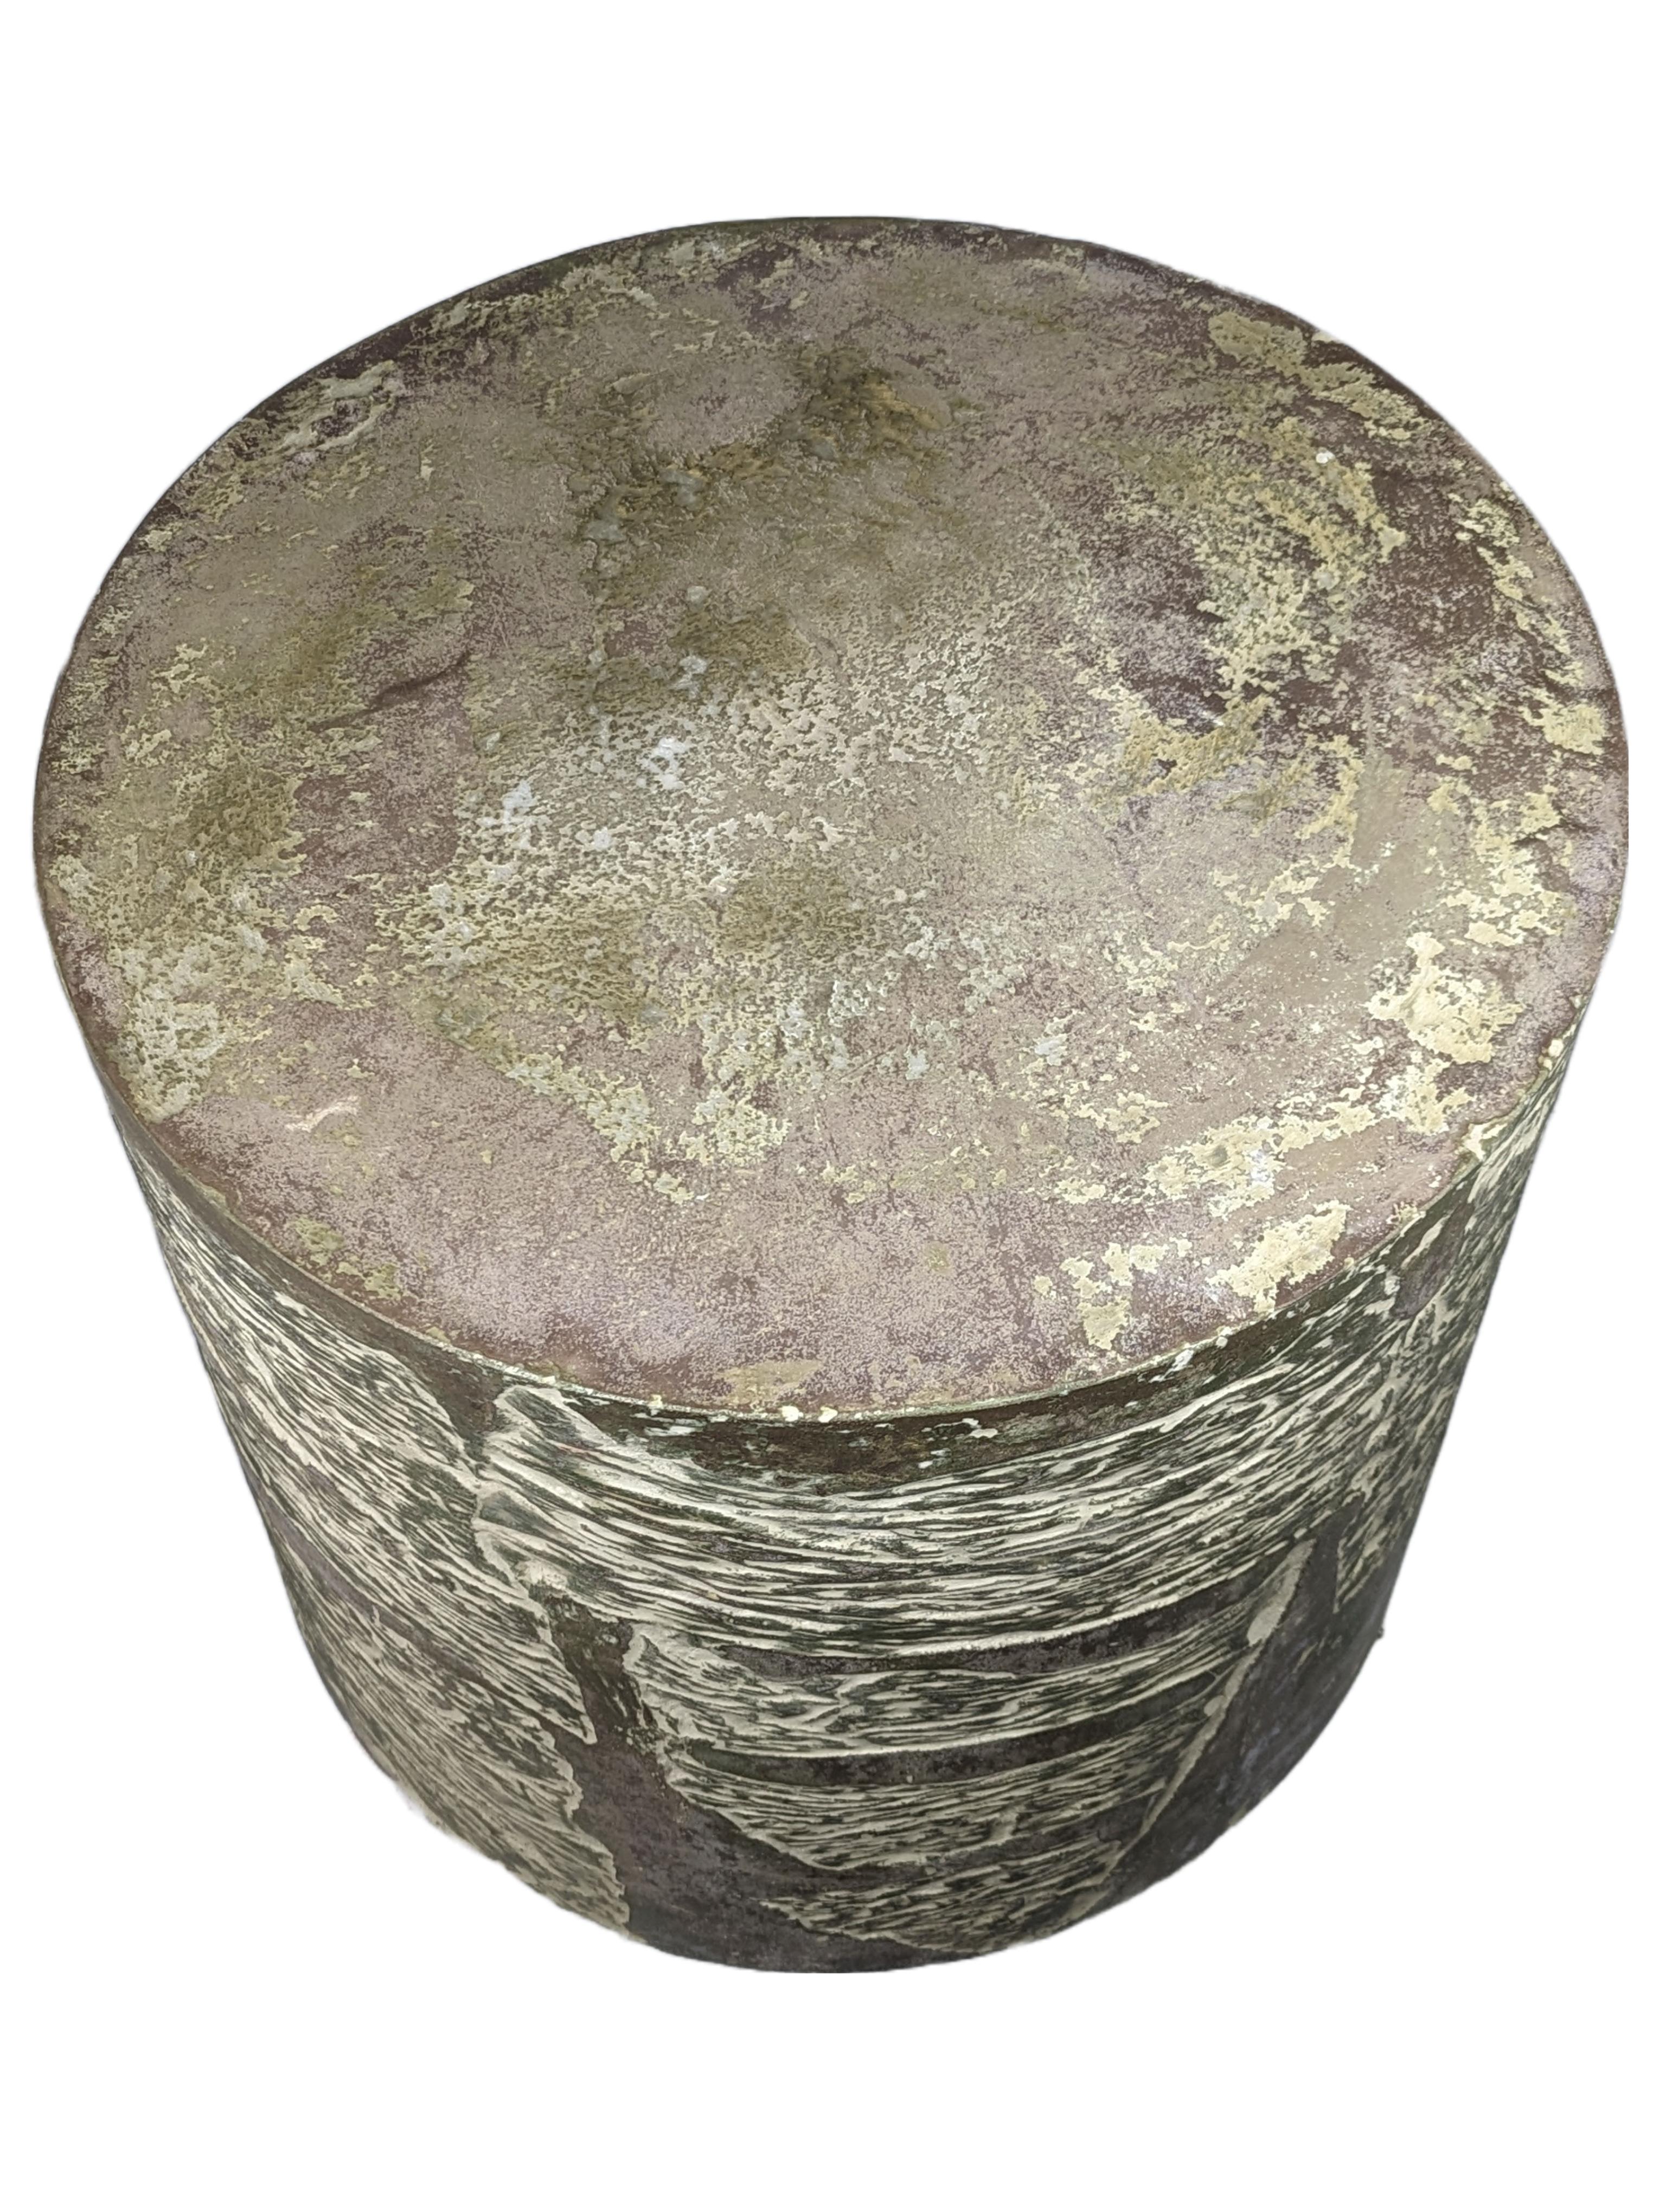 Cast Contemporary, Textured Round Concrete Coffee Table with Mottled Top, 'Whorl'